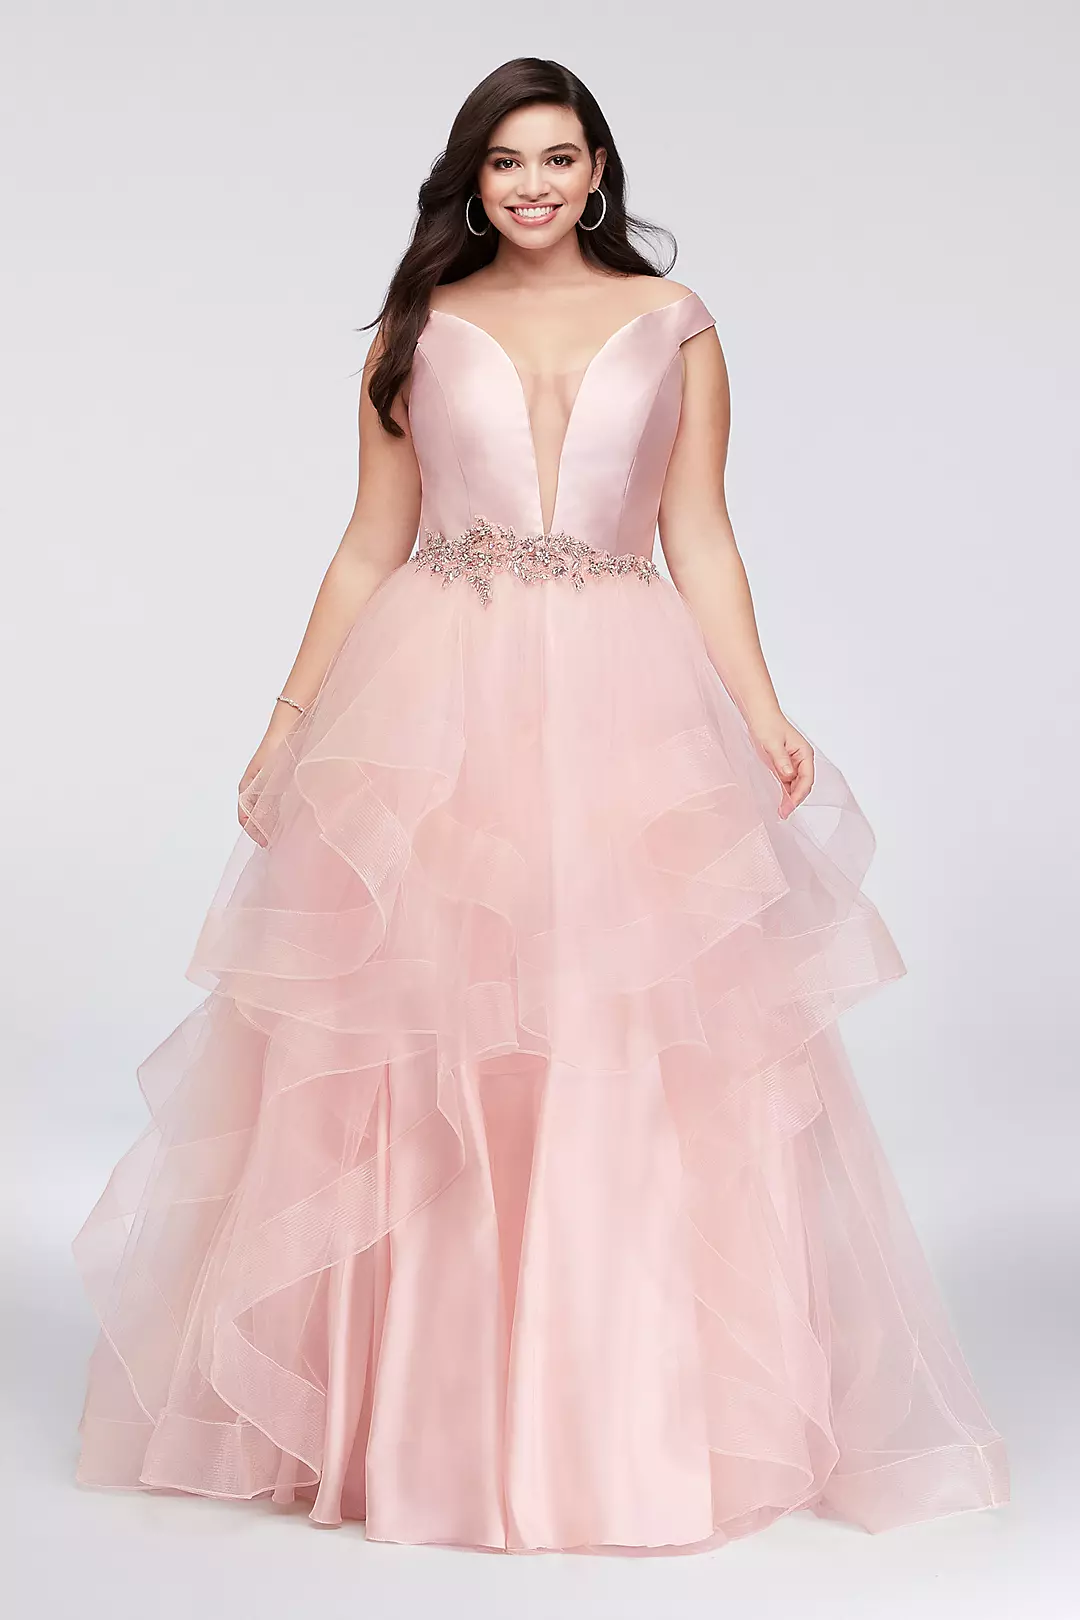 Mikado and Tulle Illusion Plunge Ball Gown Image